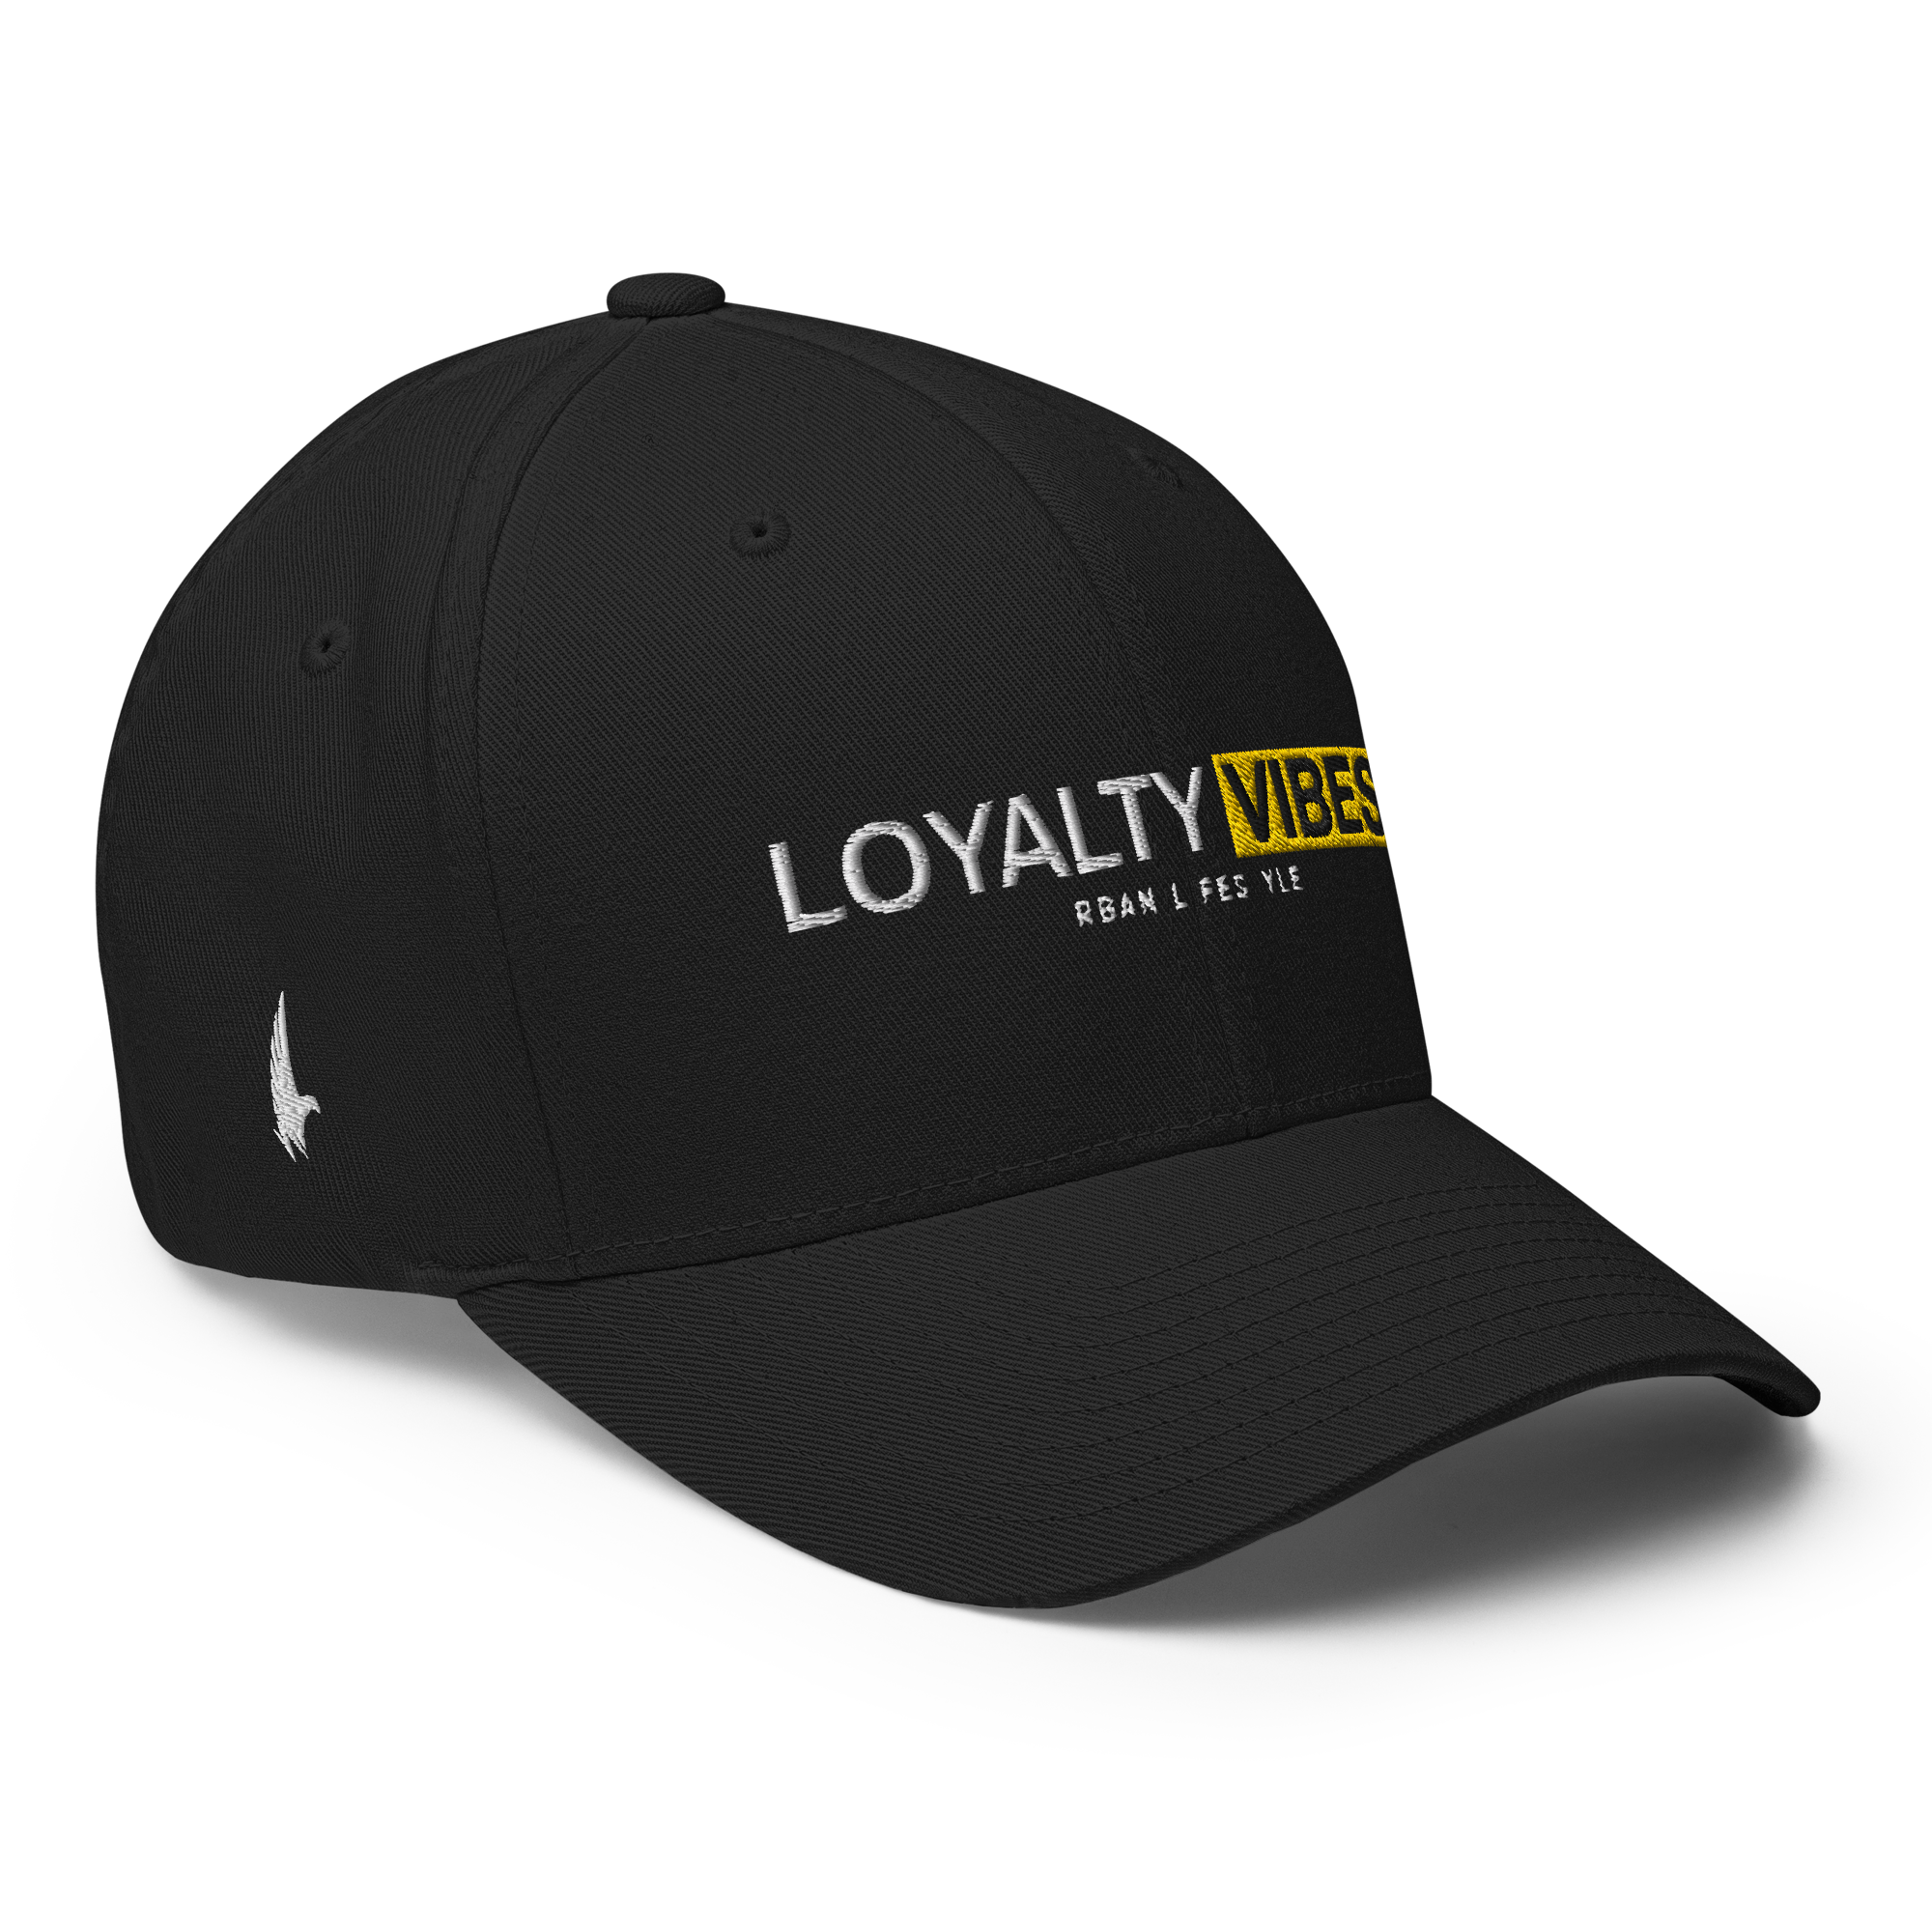 Lifestyle Logo Fitted Hat - Black - Loyalty Vibes